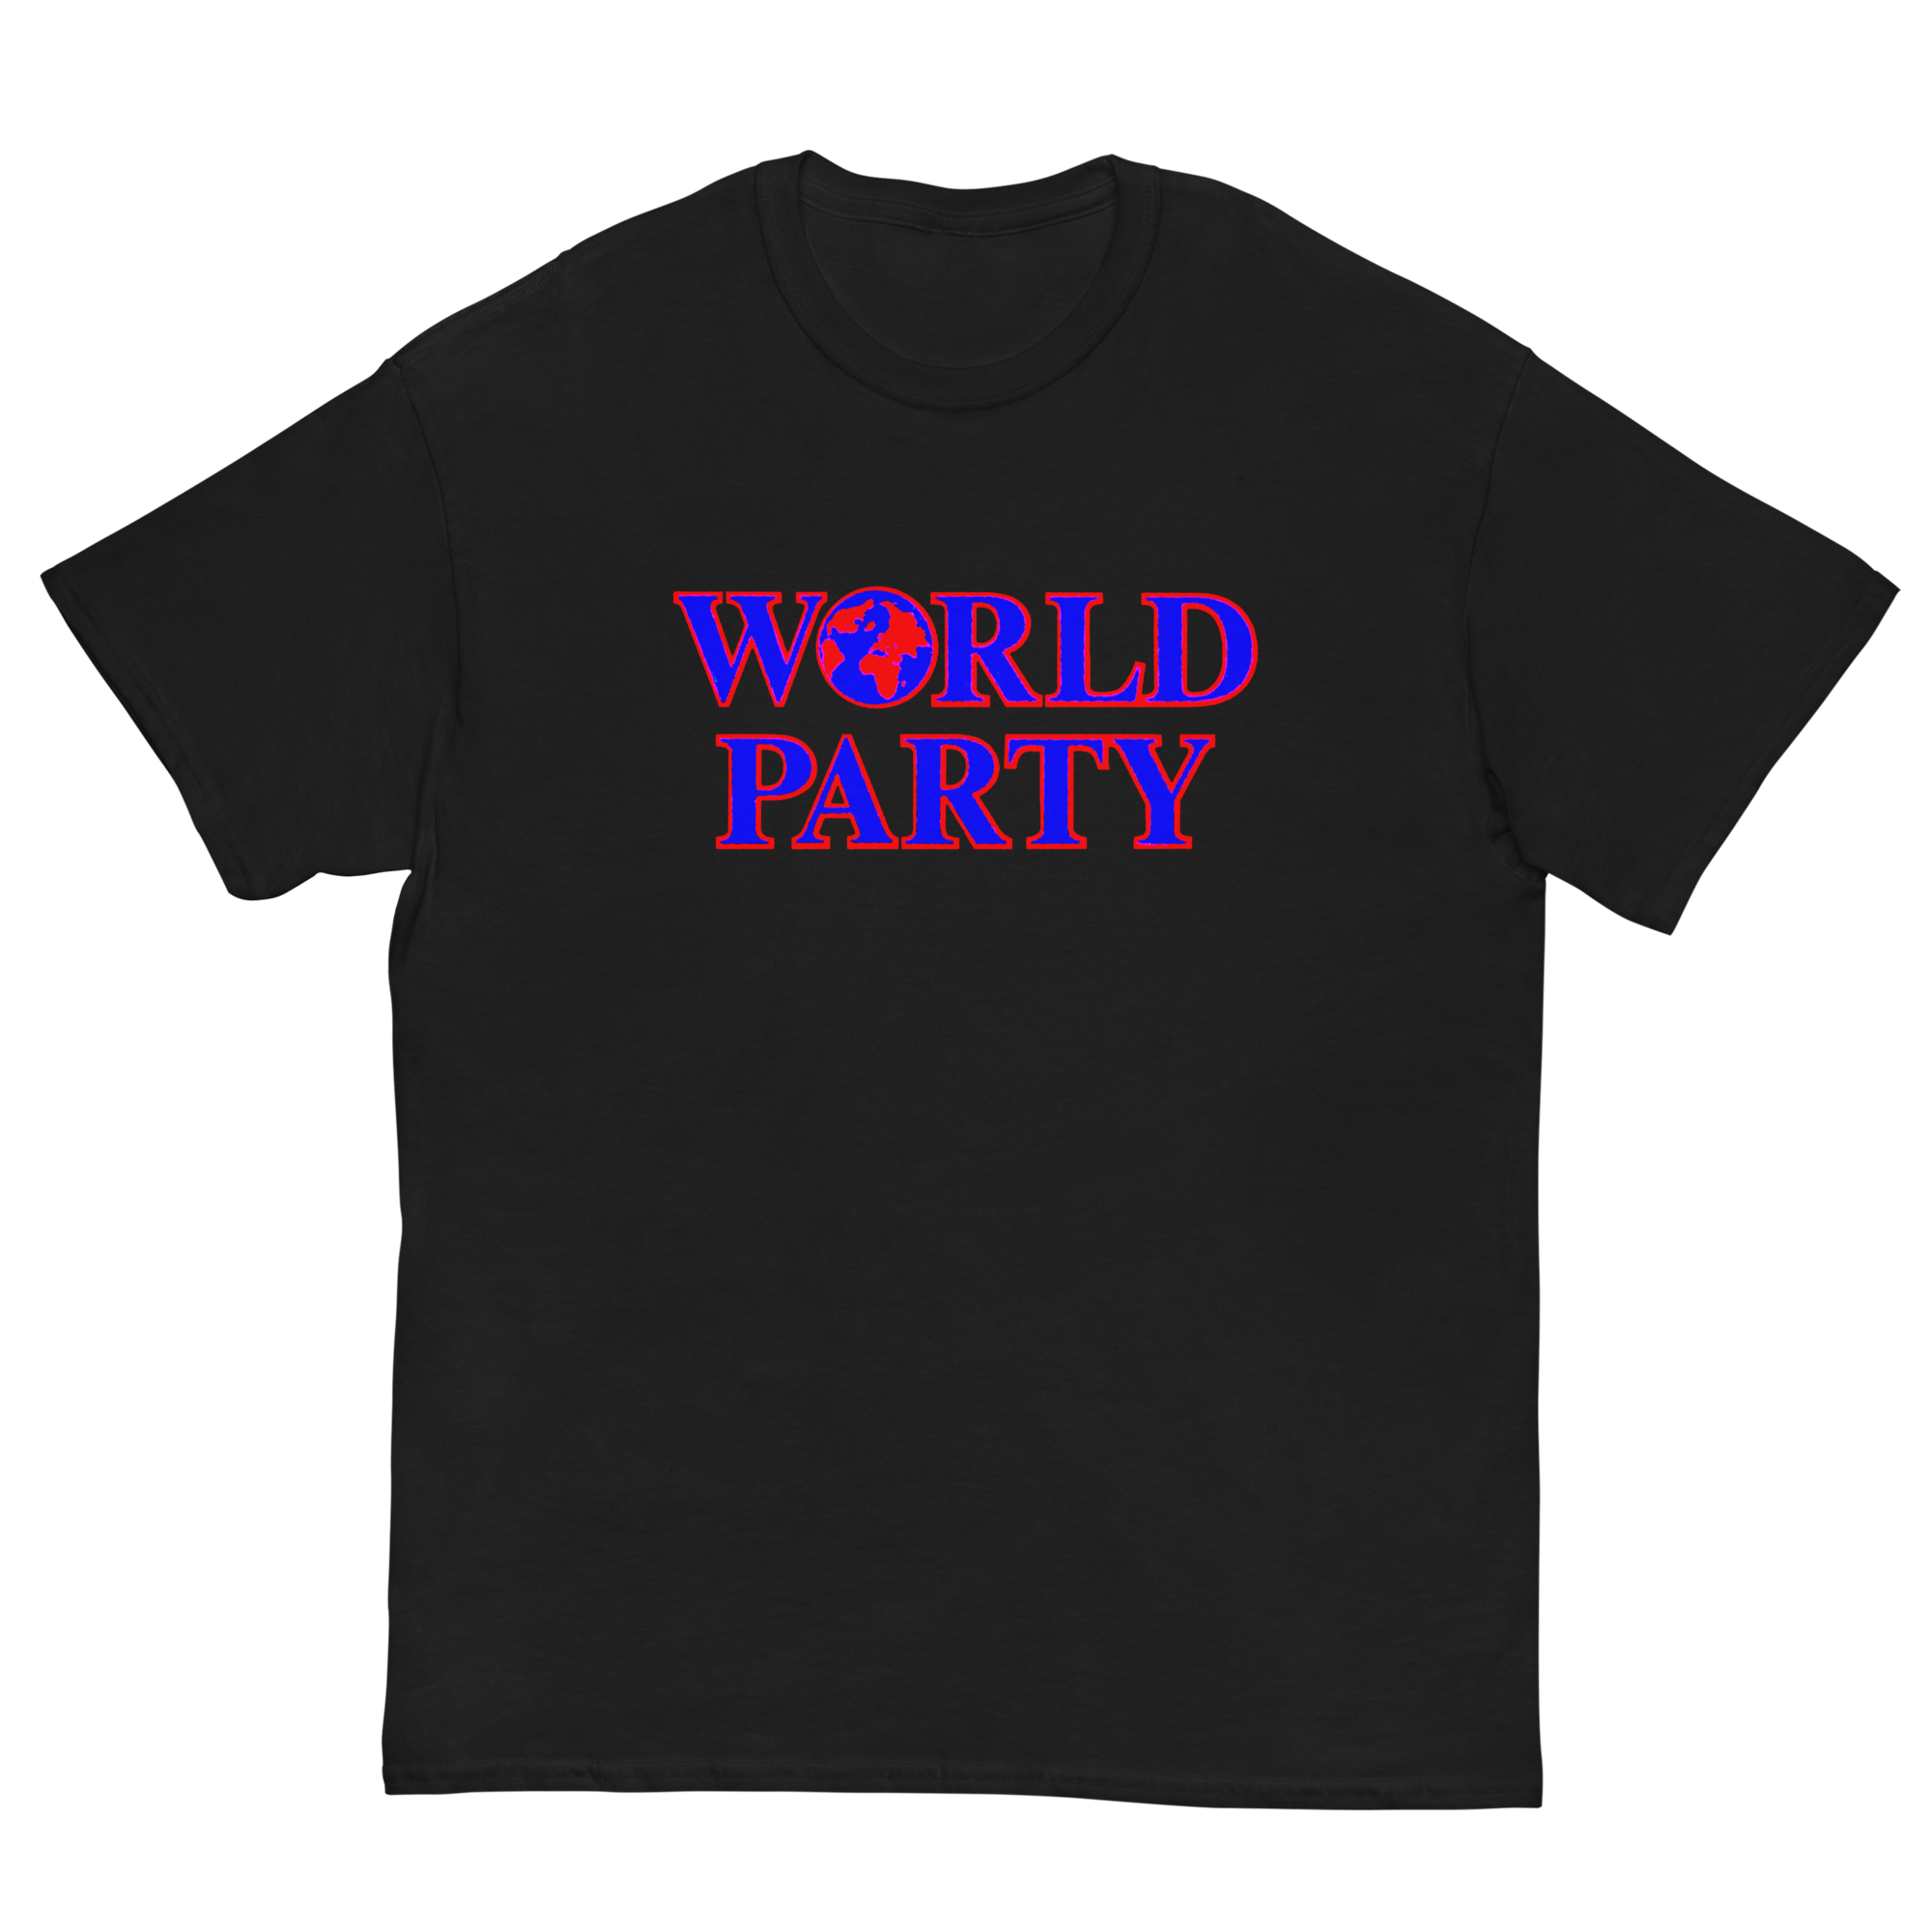 WORLD PARTY T-SHIRT